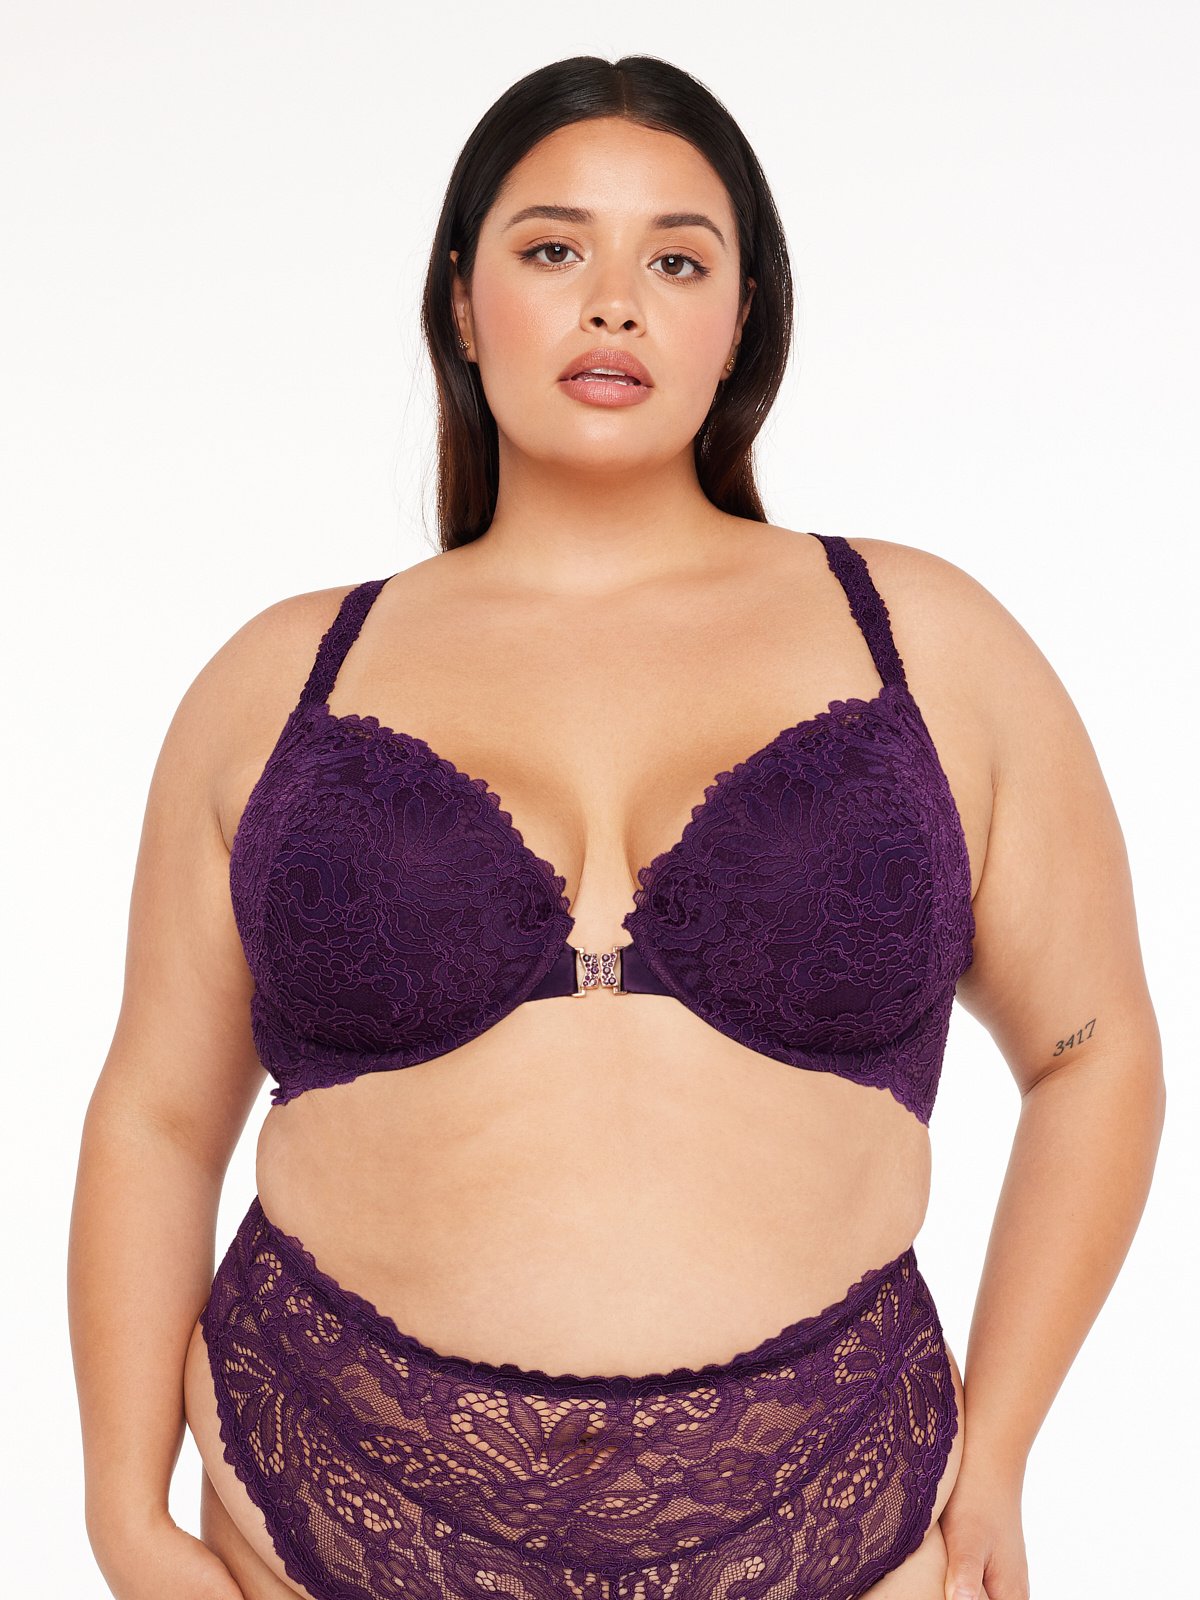 Buy erfeel size 34A Sexy Bombshell-Purple Floral Lace Black bra